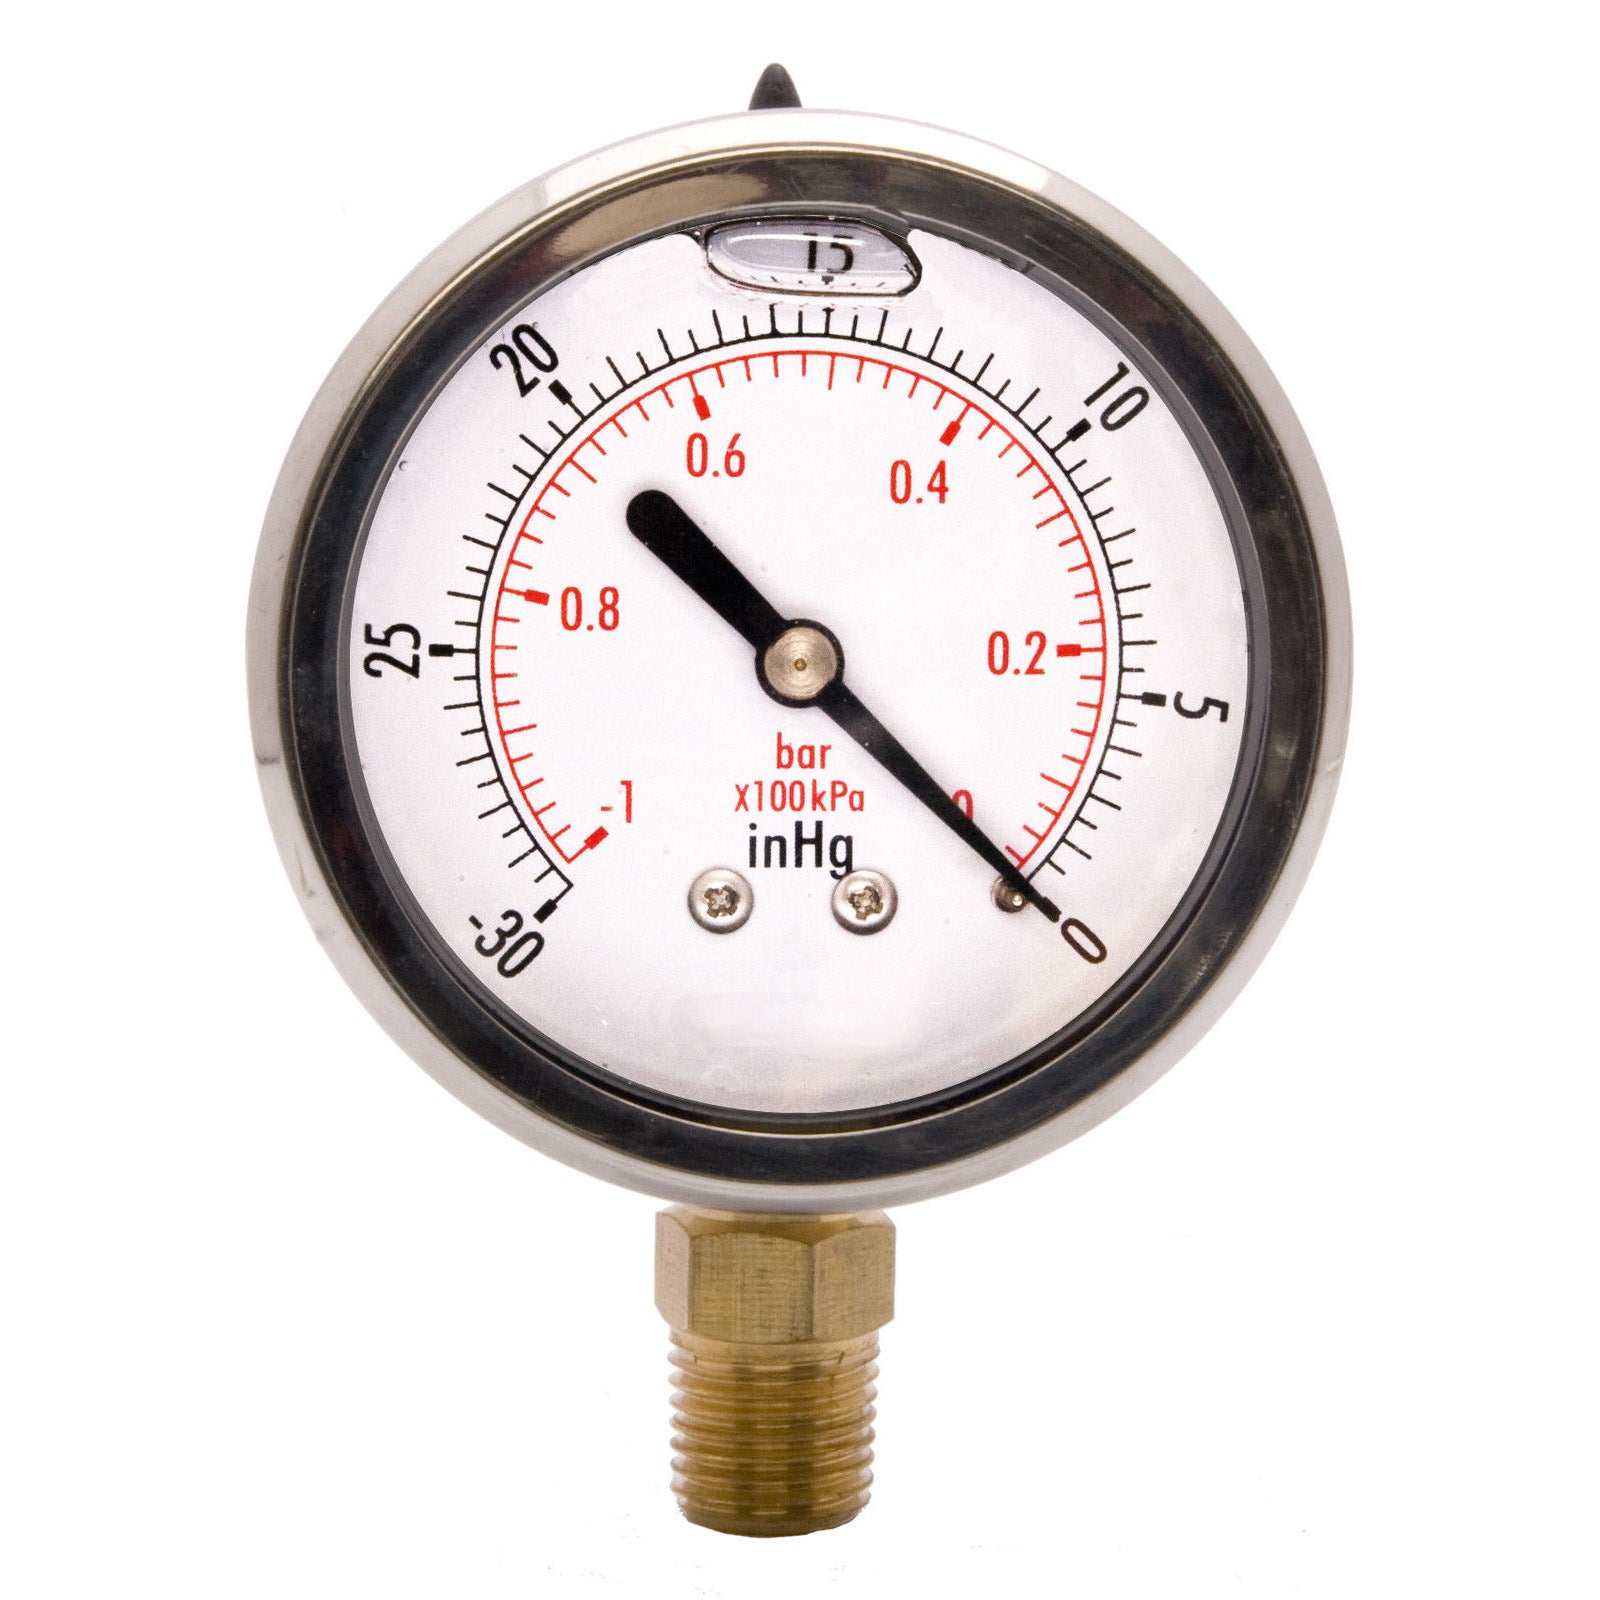 Hardware Factory Store Inc - Vacuum Pressure Gauges 0 To -30Hg - Oil Filled 2" Dial - 1/4" NPT